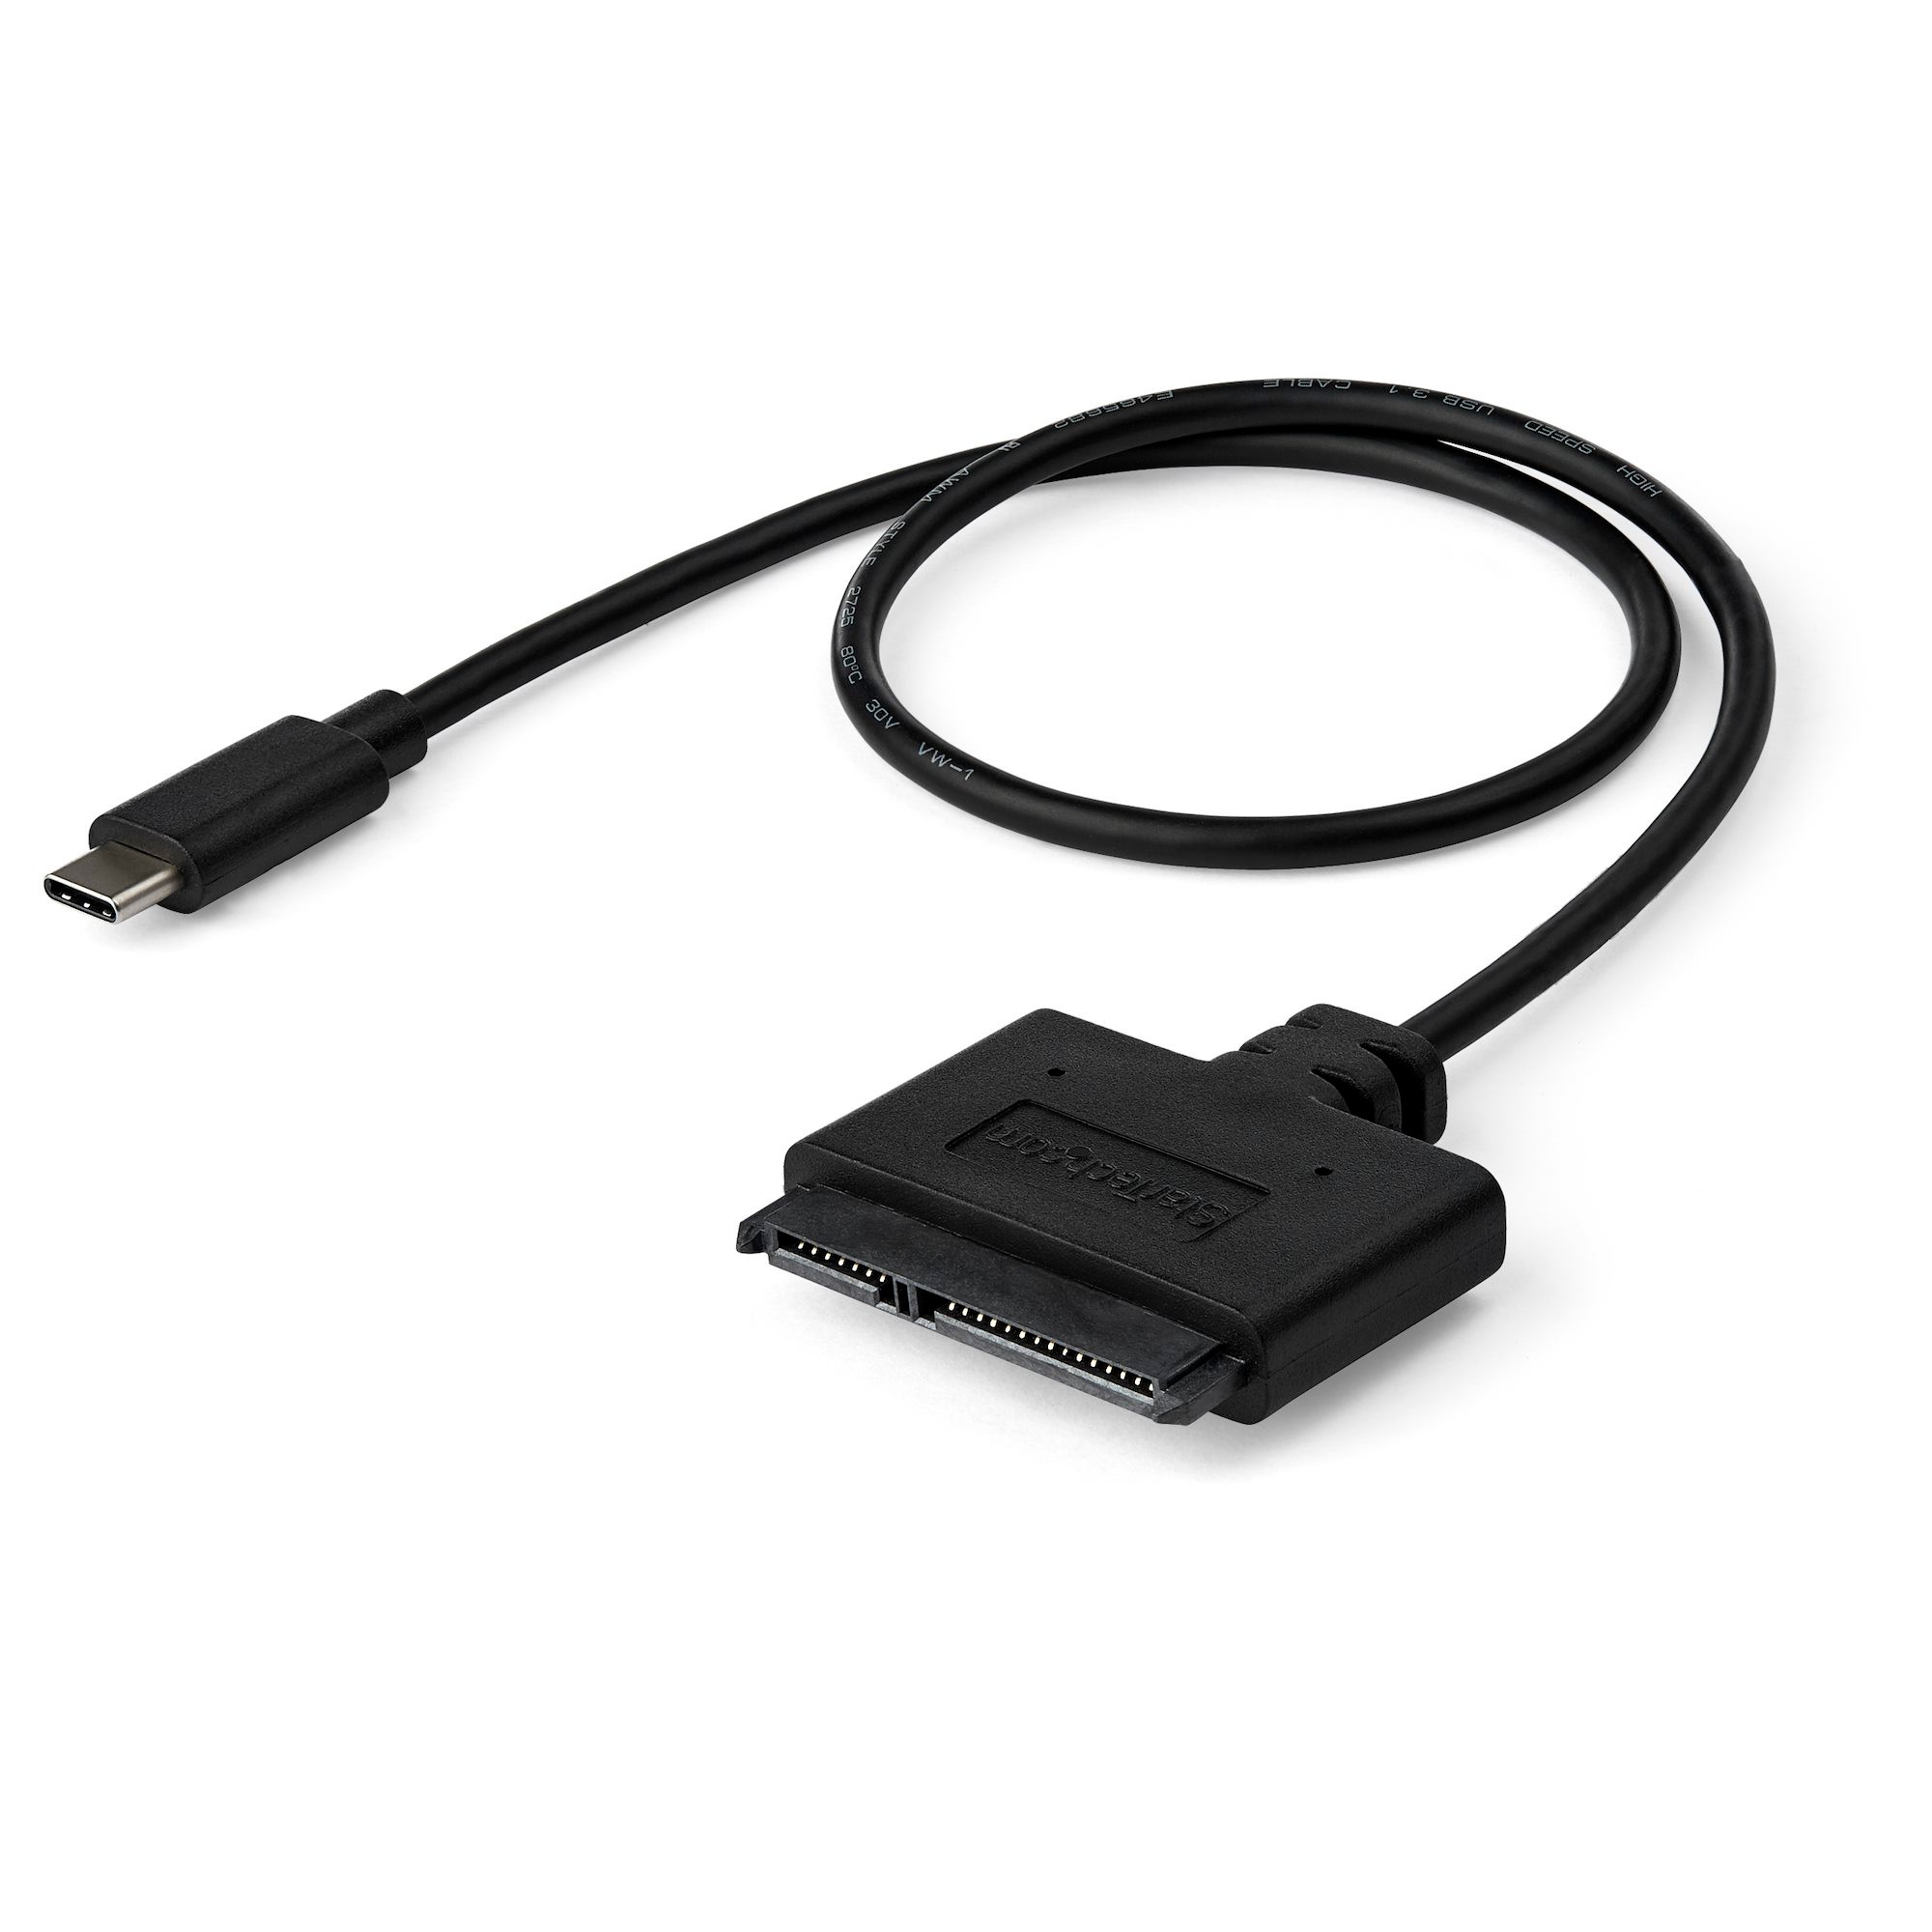 StarTech.com USB C To SATA Adapter - for 2.5" SATA Drives - UASP External Hard Drive Cable USB Type C to SATA Adapter - Get ultra-fast access to data by